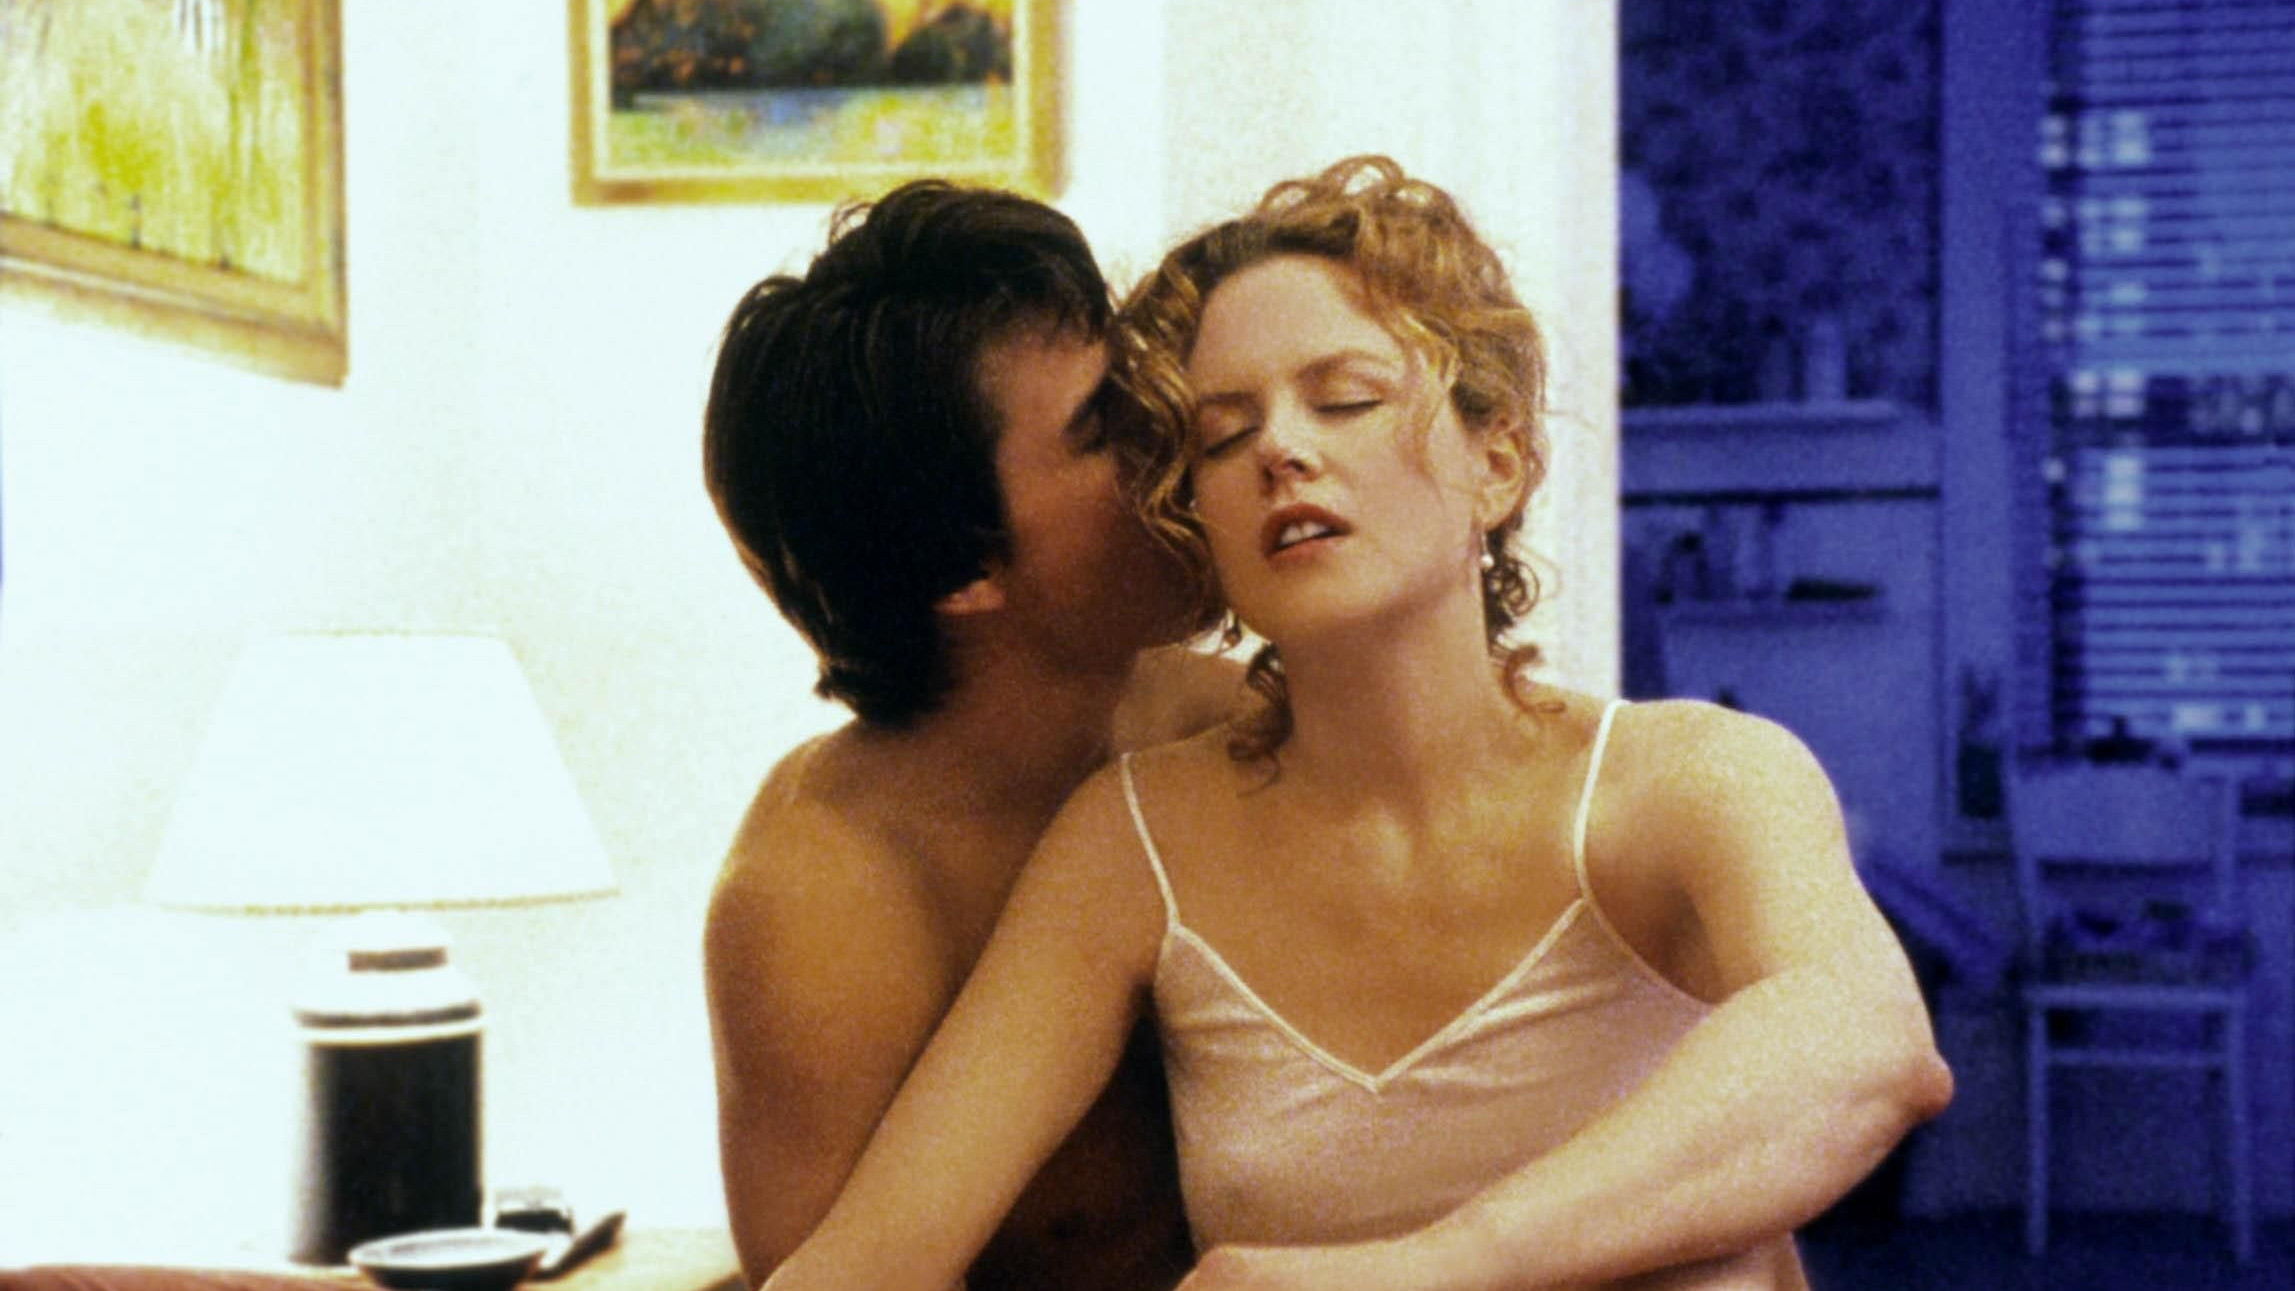 Best erotic movies of all time